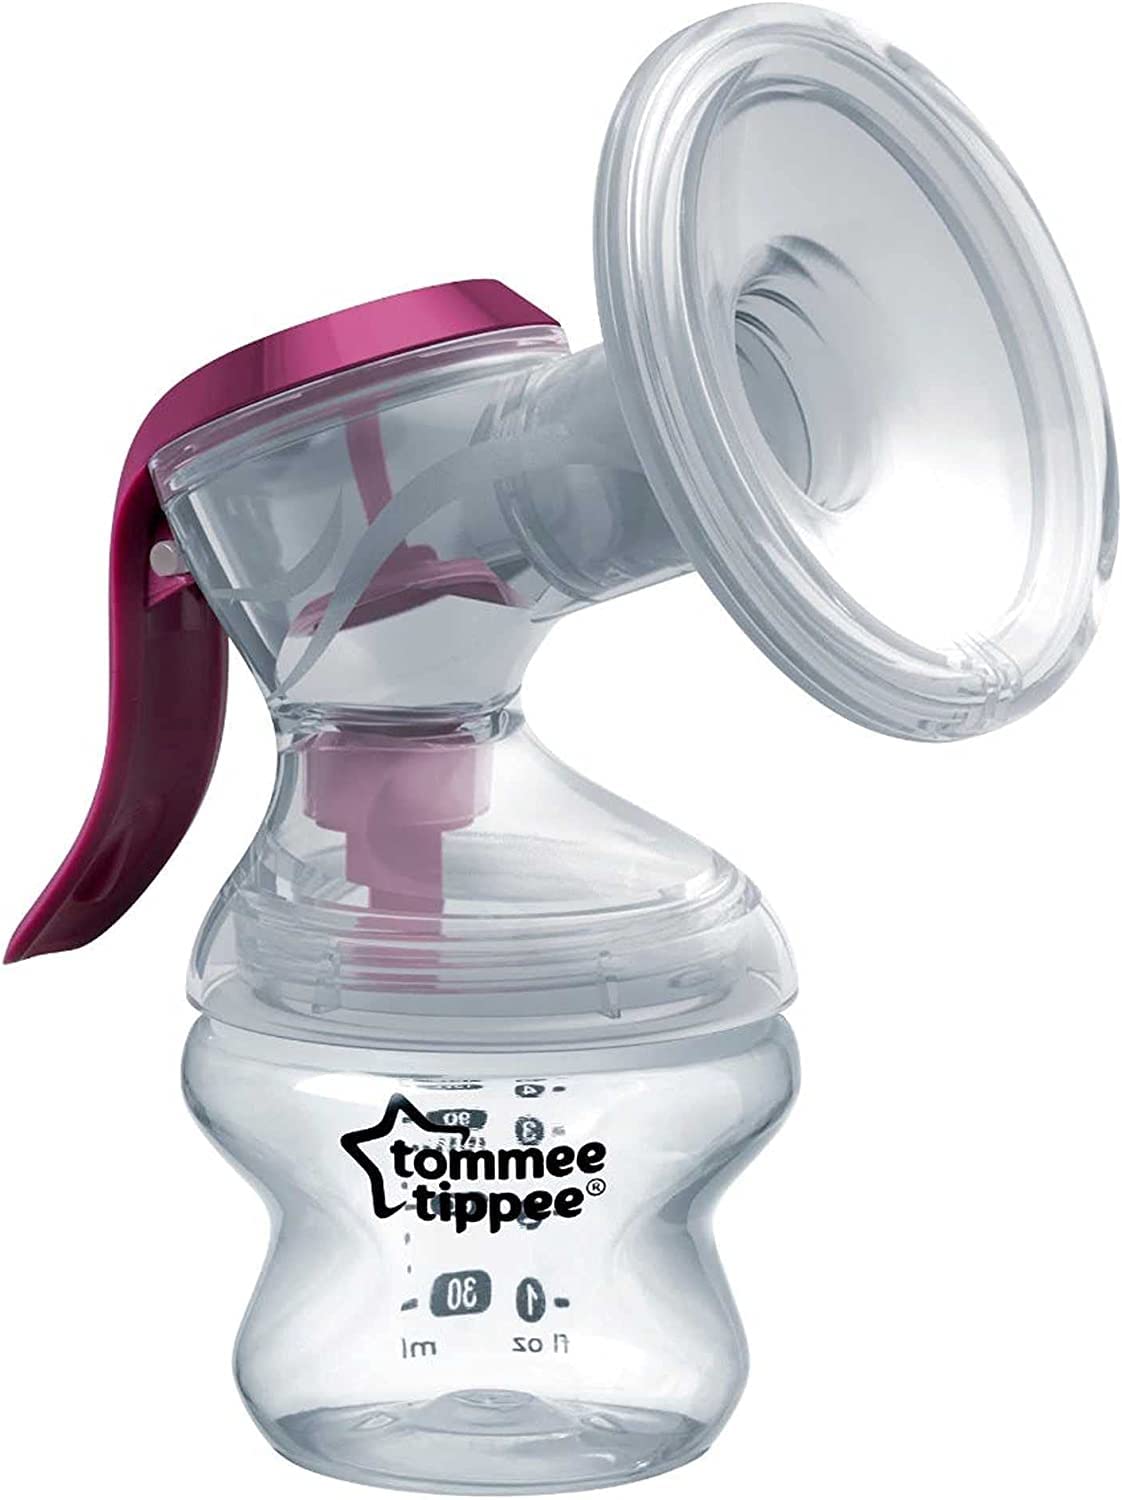 Tommee Tippee TT-FED29 Manuelle Milchpumpe, transparent, 200 g